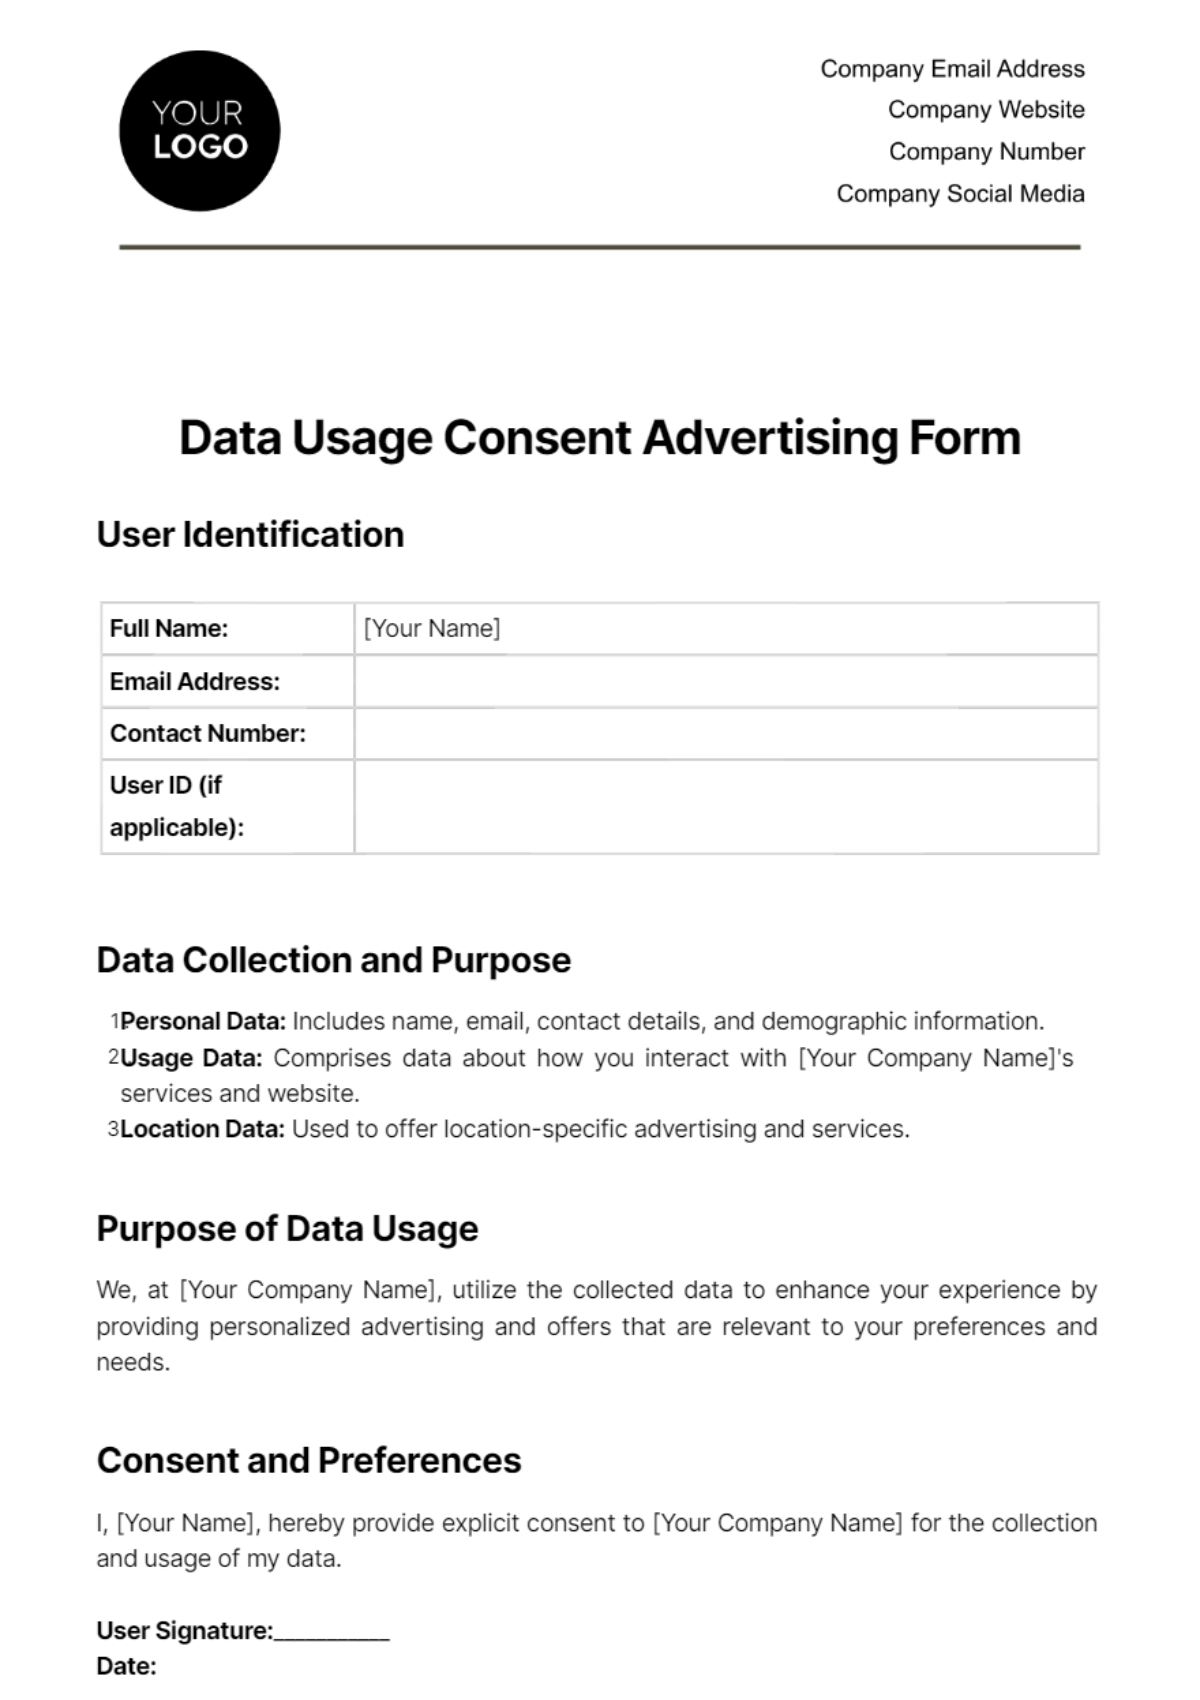 Data Usage Consent Advertising Form Template